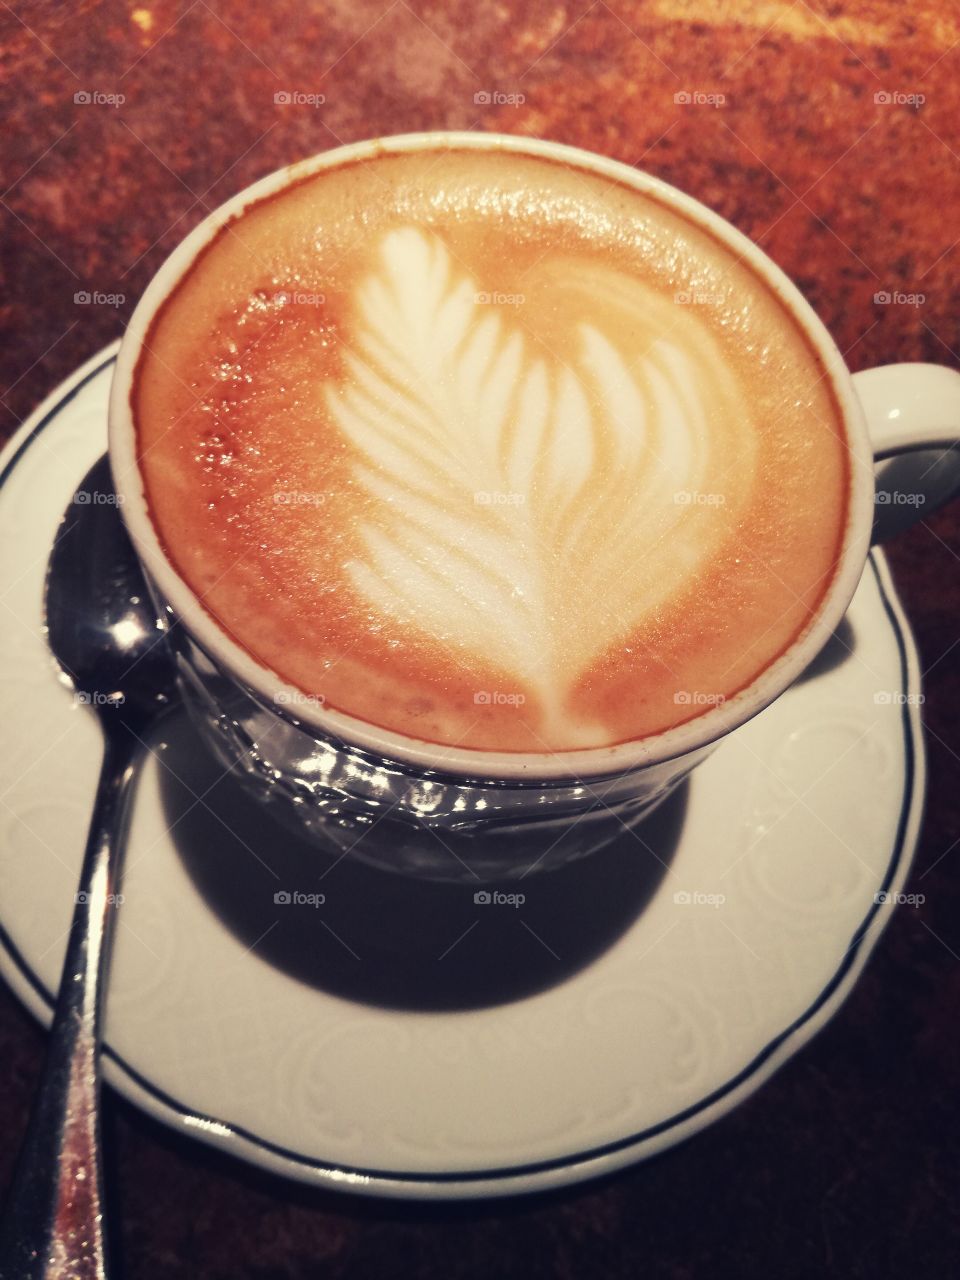 The best cappuccino I ever had